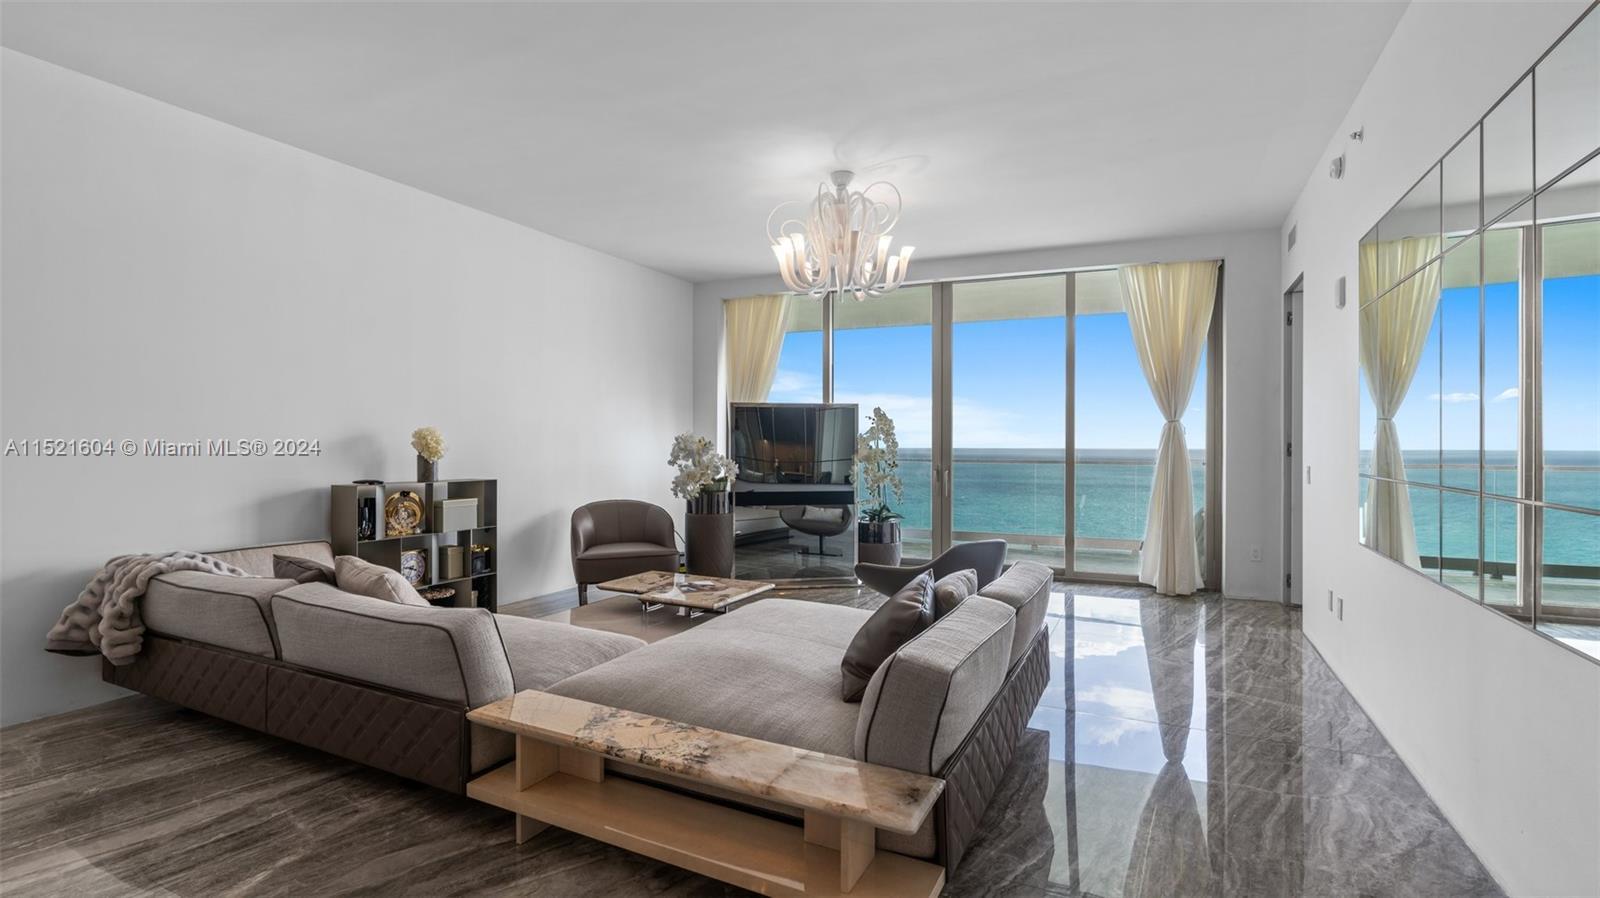 This gorgeous oceanfront condo at one of the top luxury buildings in Sunny Isles boasts more than 30